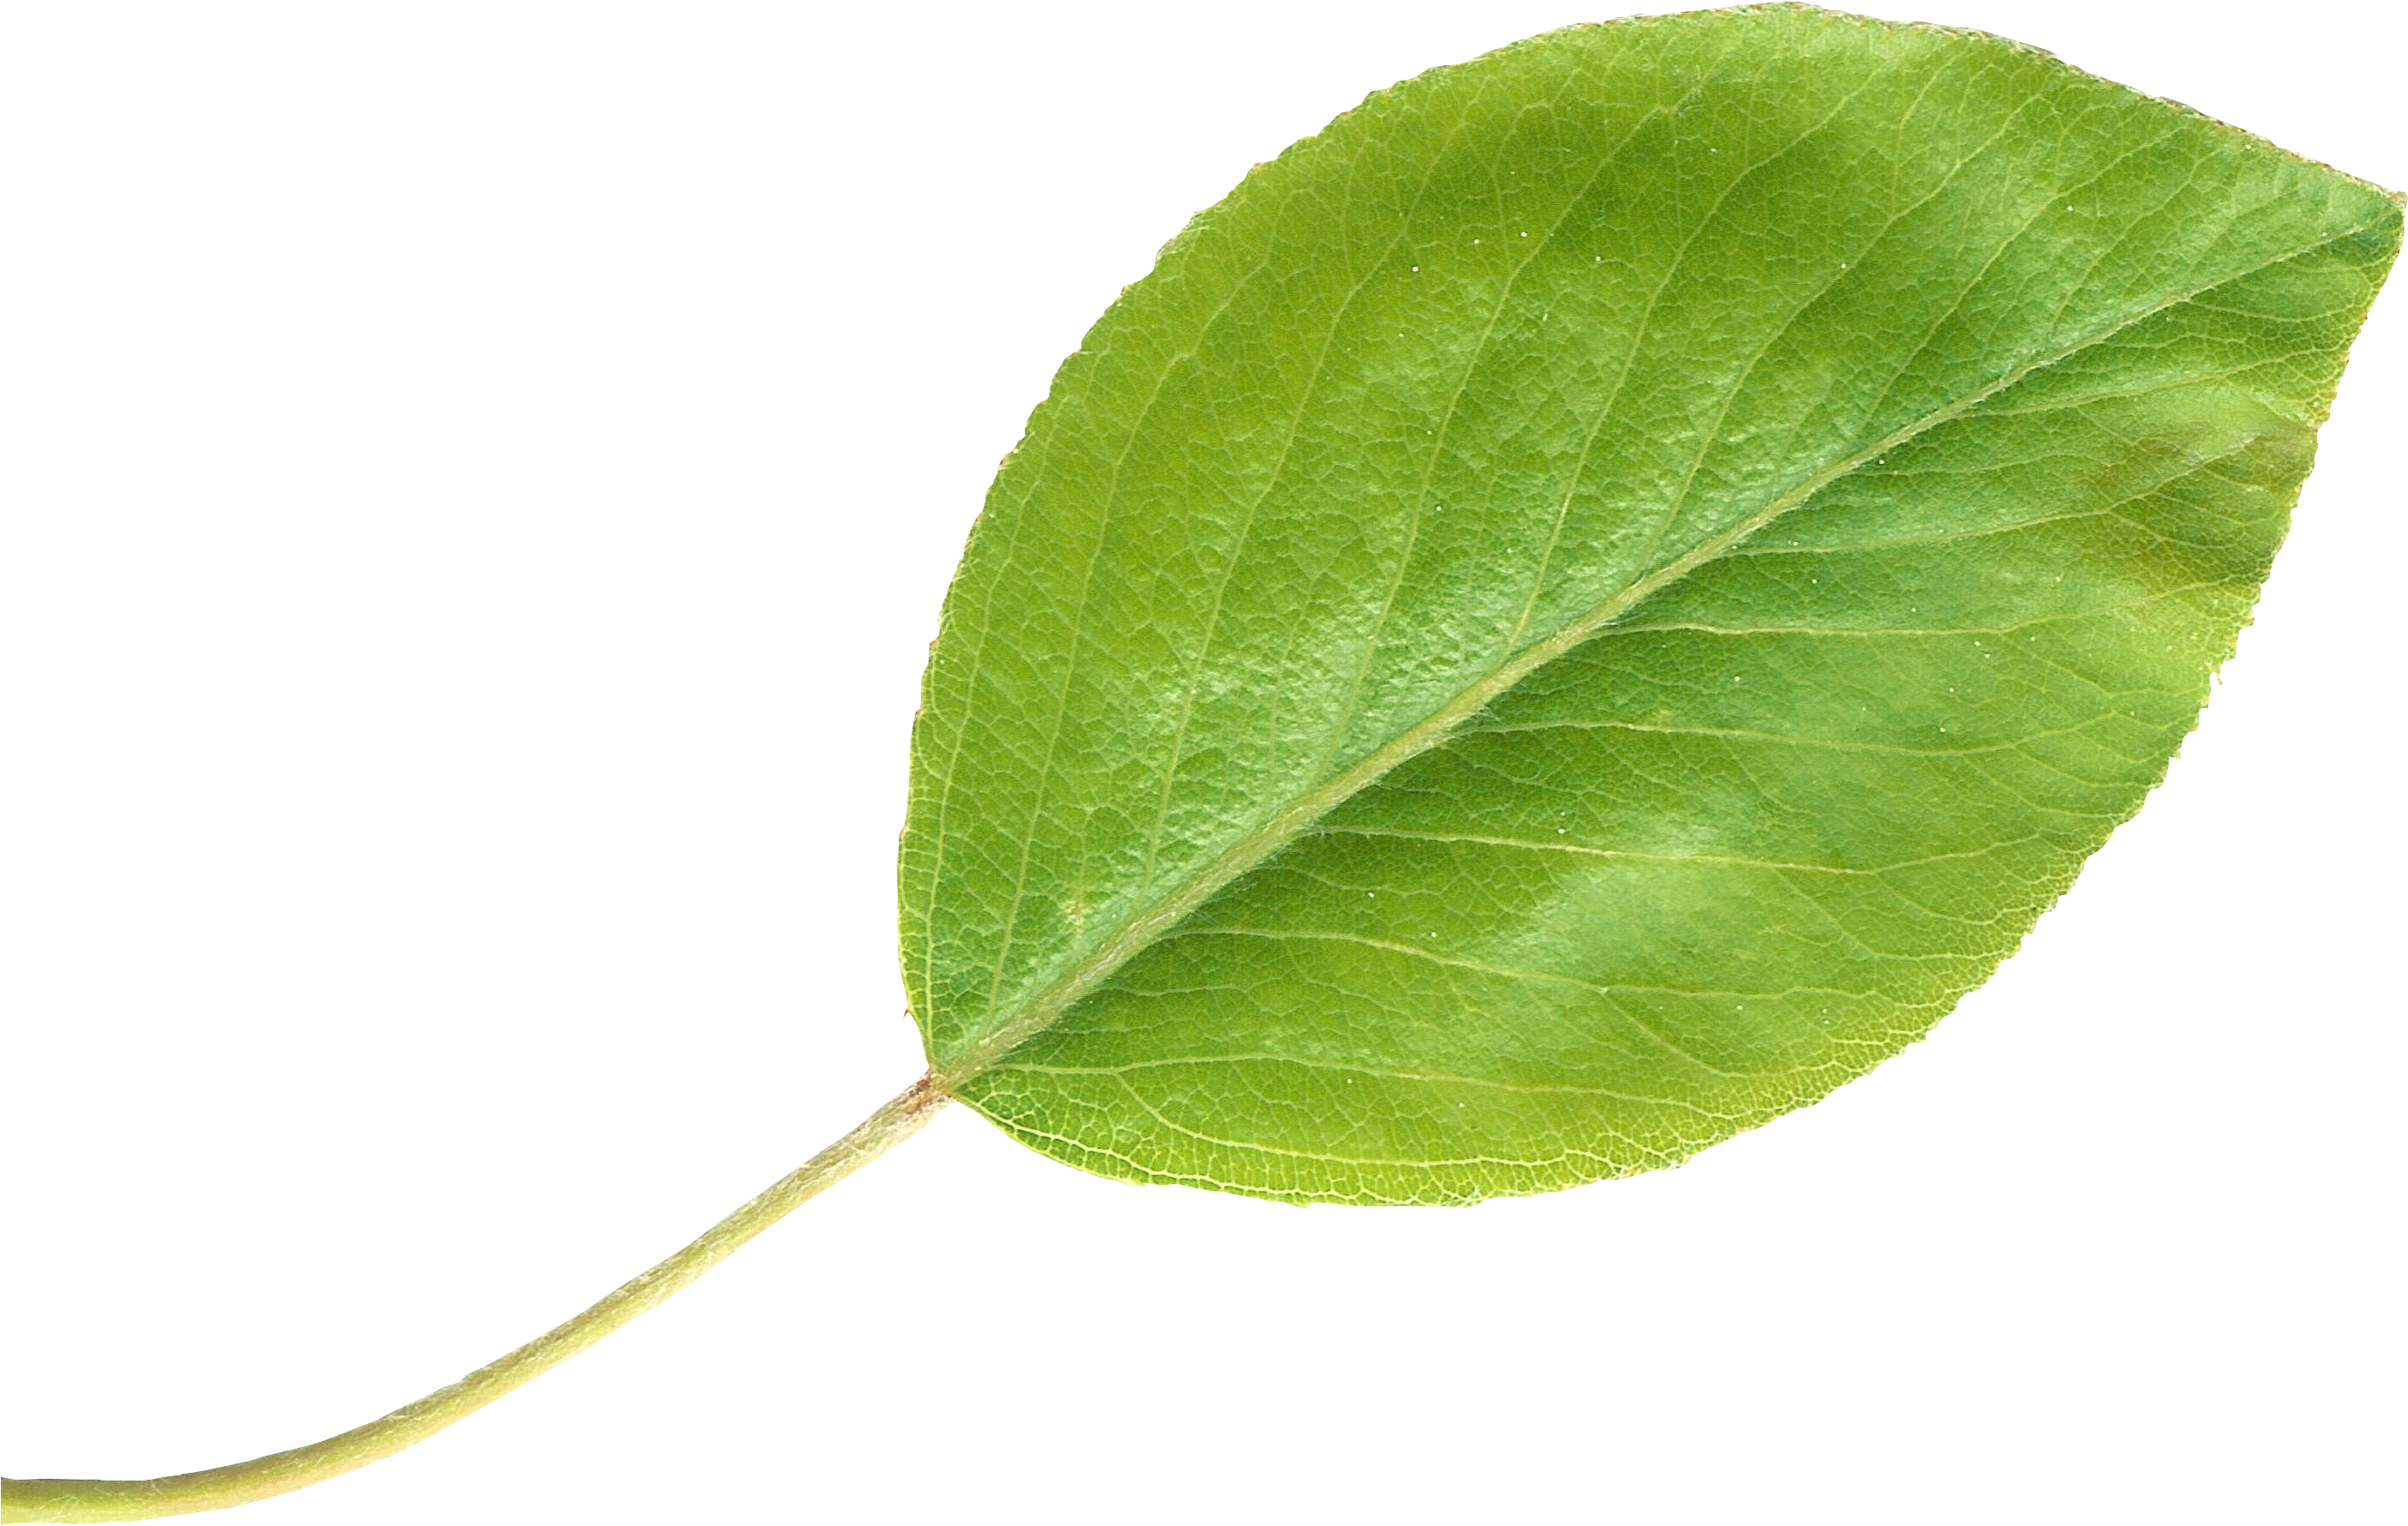 Green Pear Leaf Isolated.png